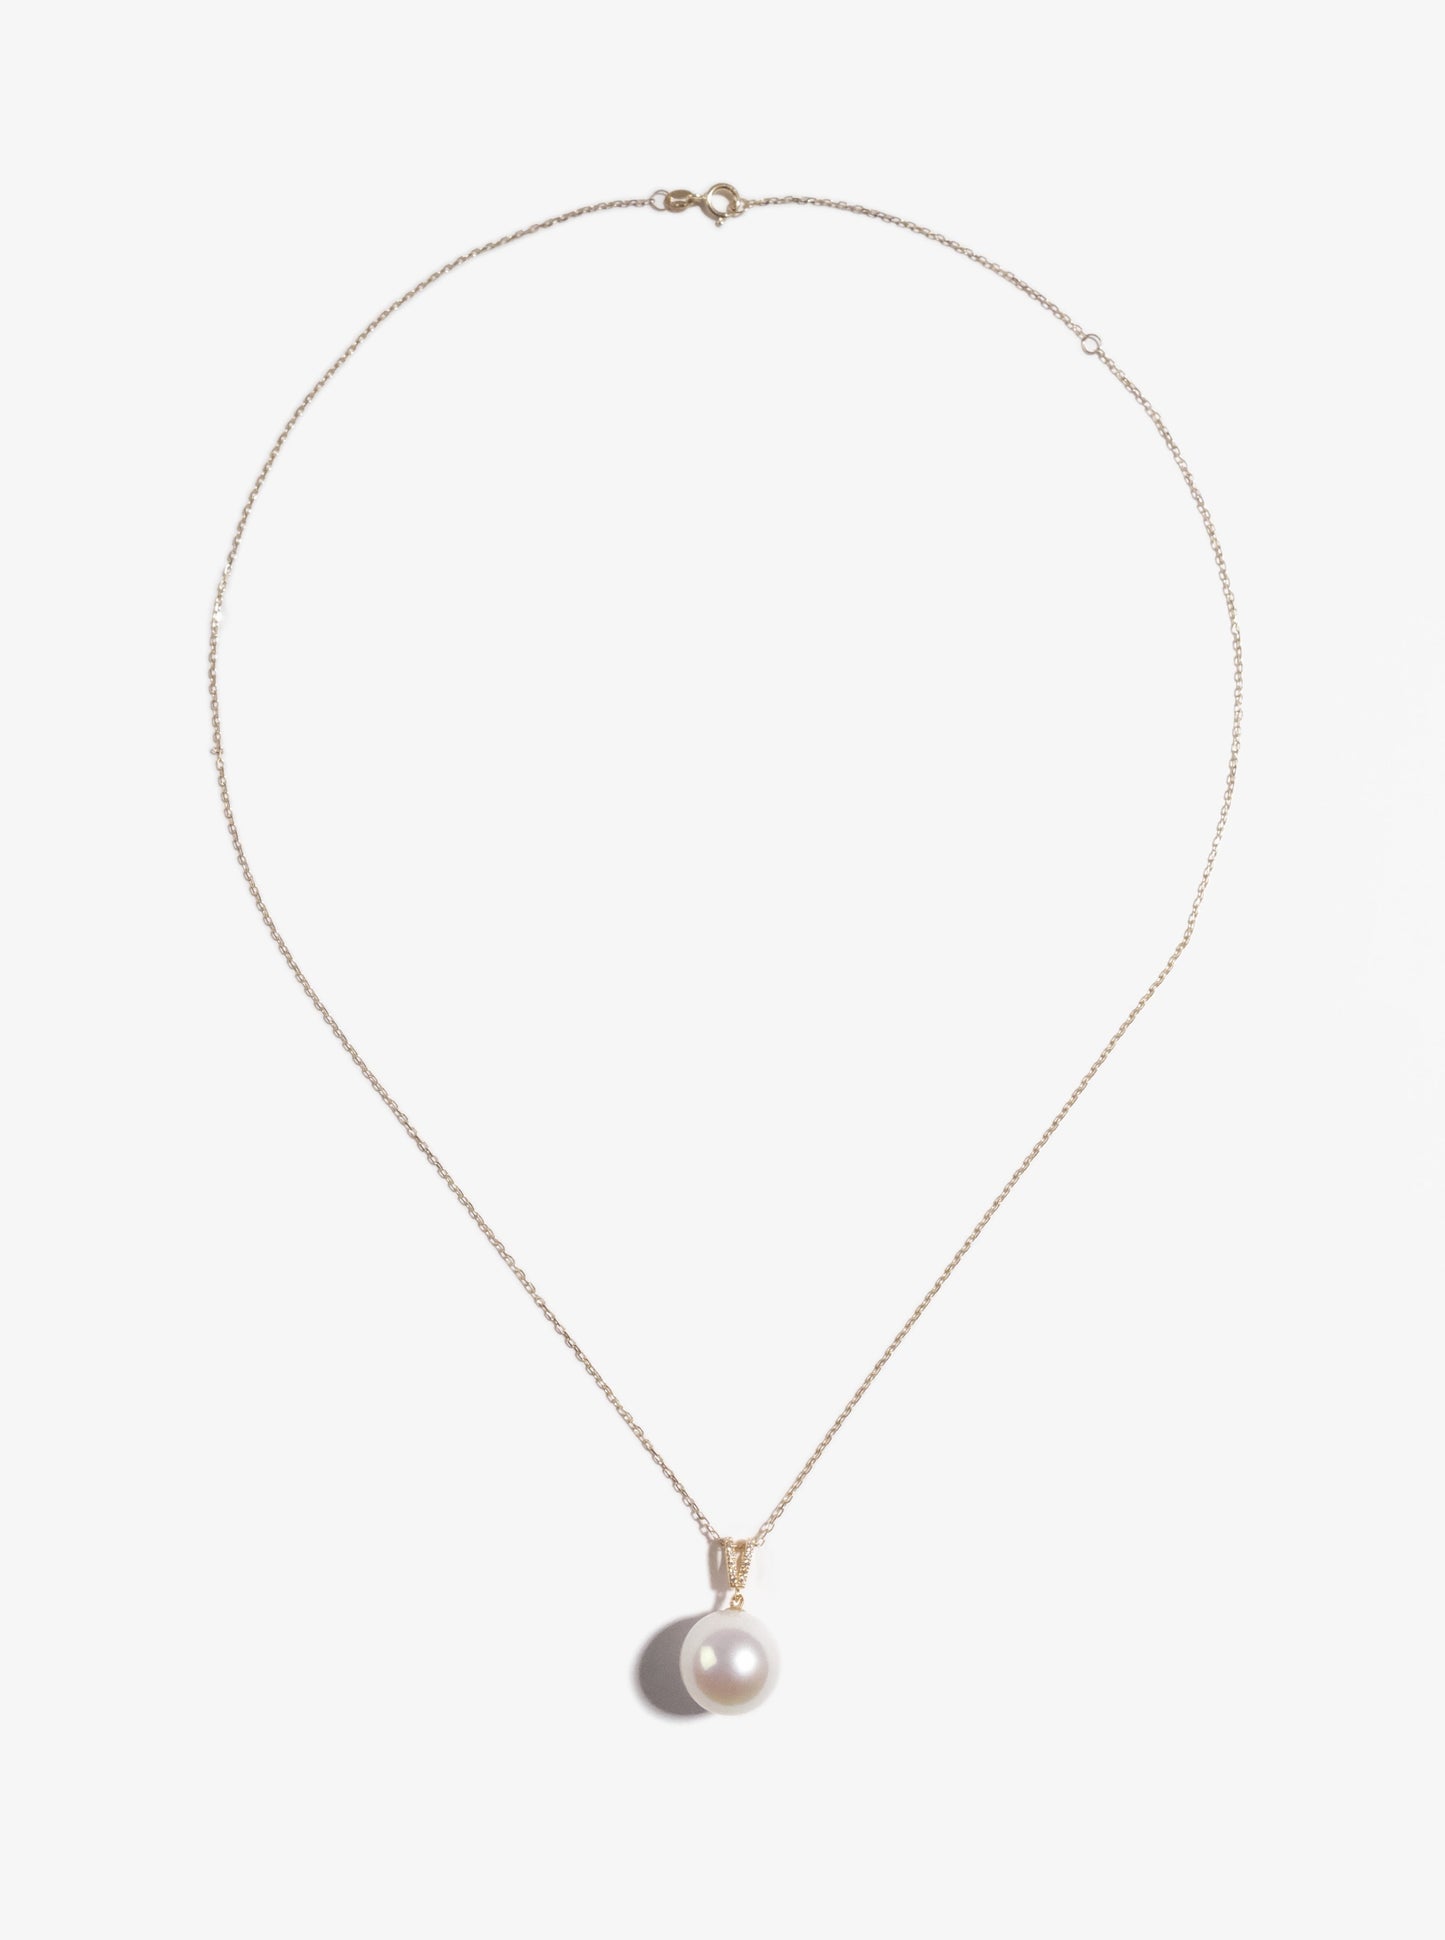 Freshwater Pearl Pendant With 18K Gold  FP18K22